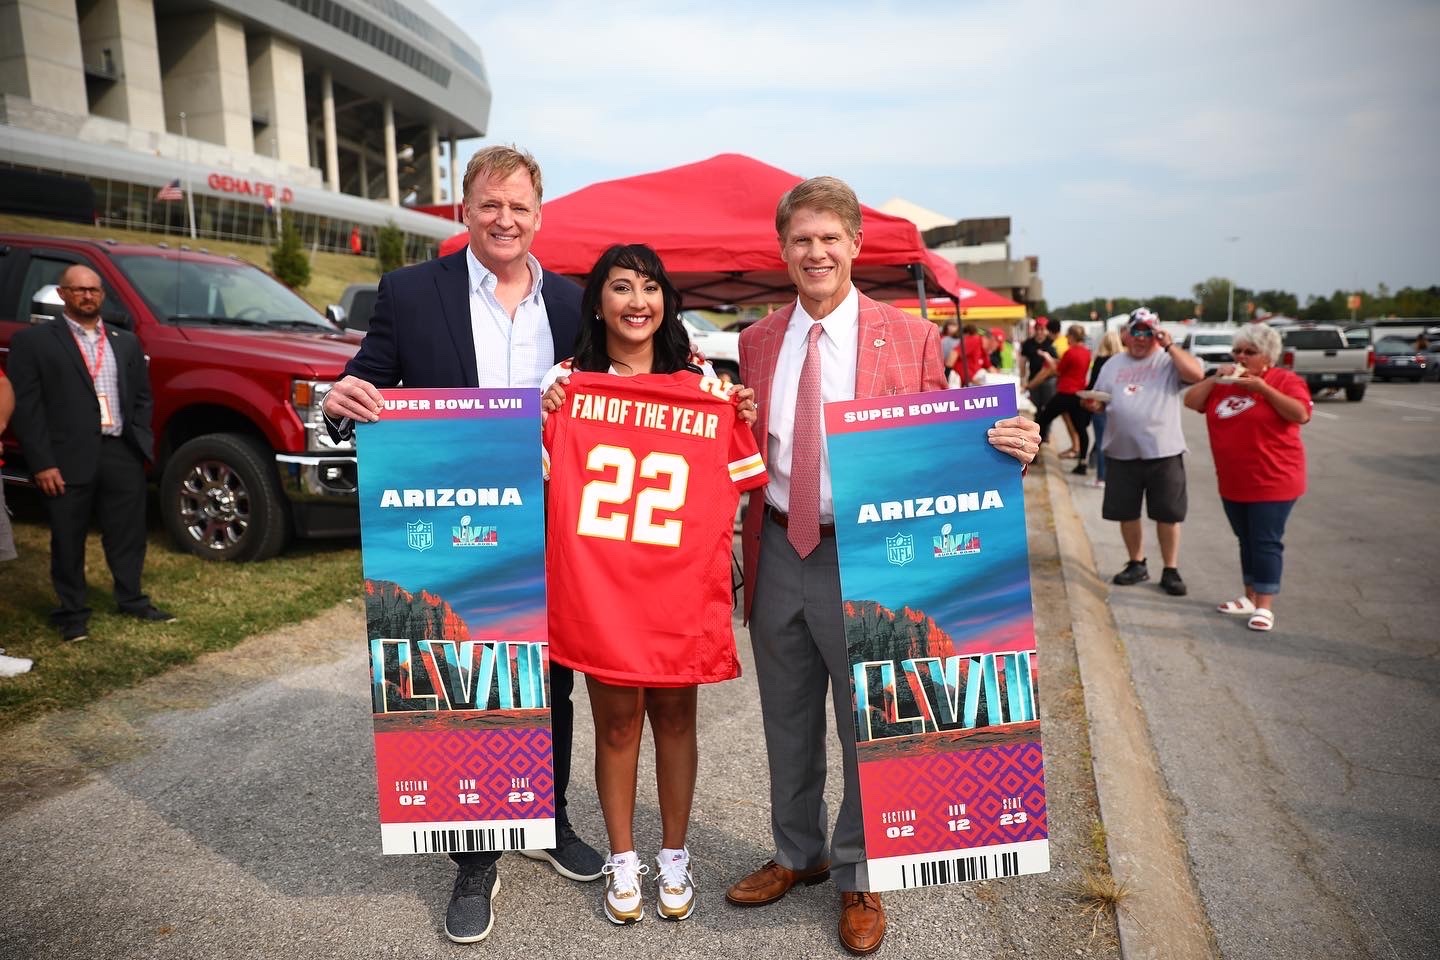 Dr. Amy Patel, Chillicothe Native, Chosen As The 2022 Chiefs Fan Of The Year